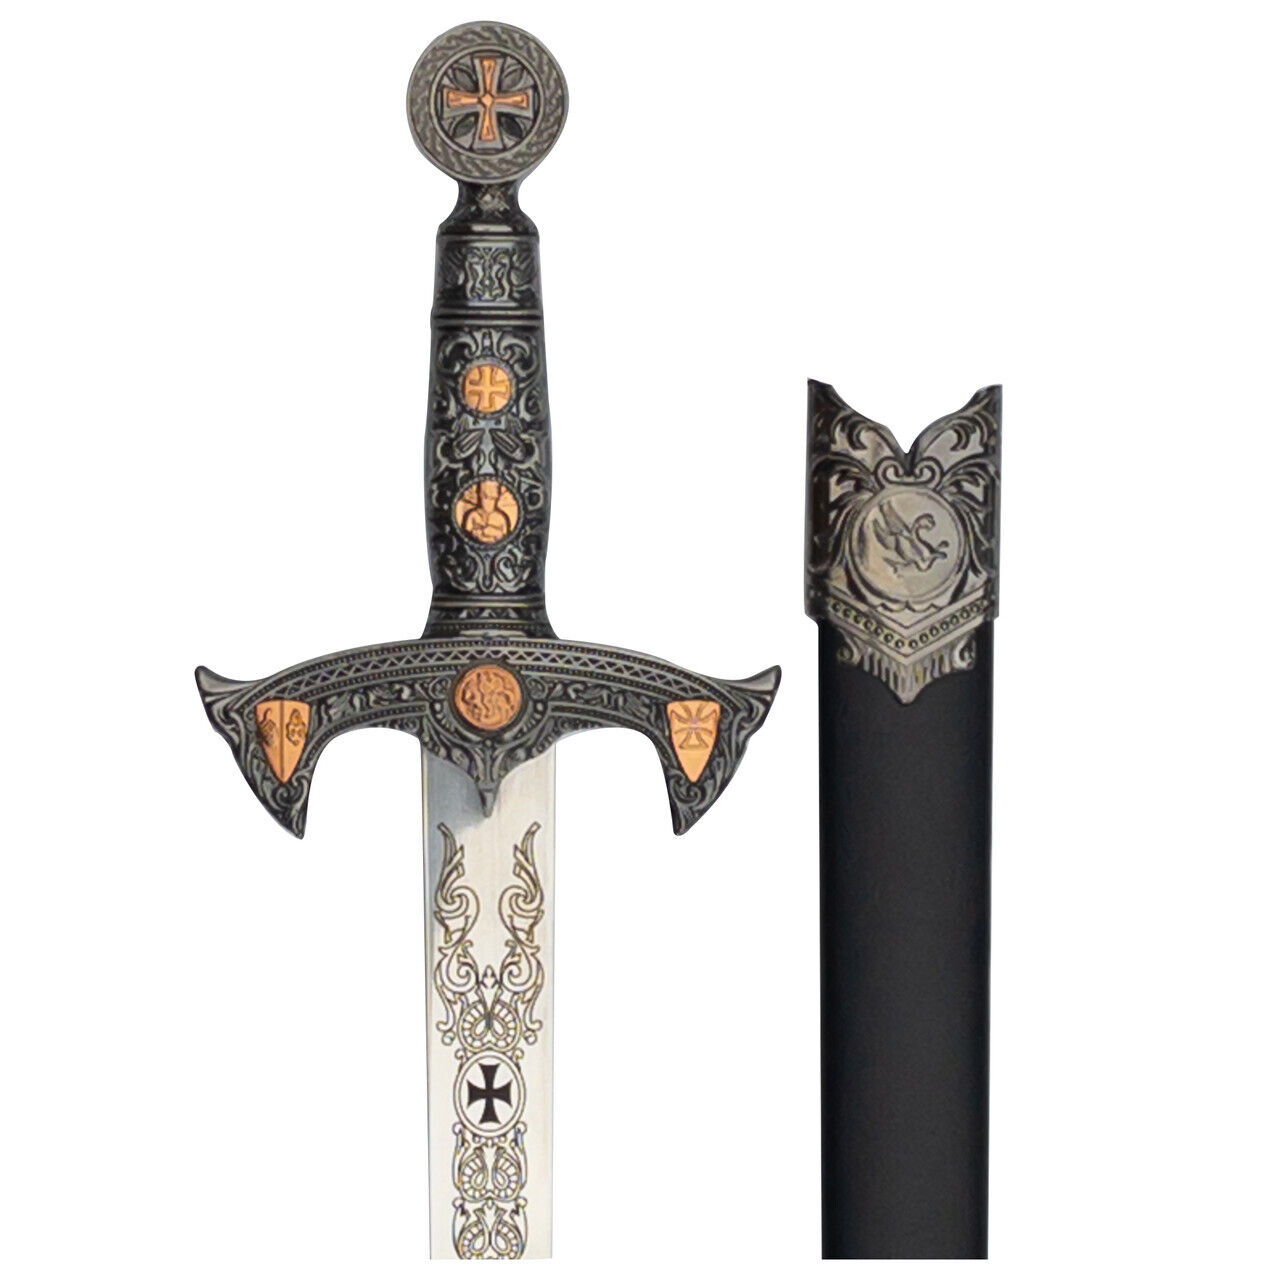 Medieval Knights Templar Sword With Scabbard Stainless Steel  Functional Sword